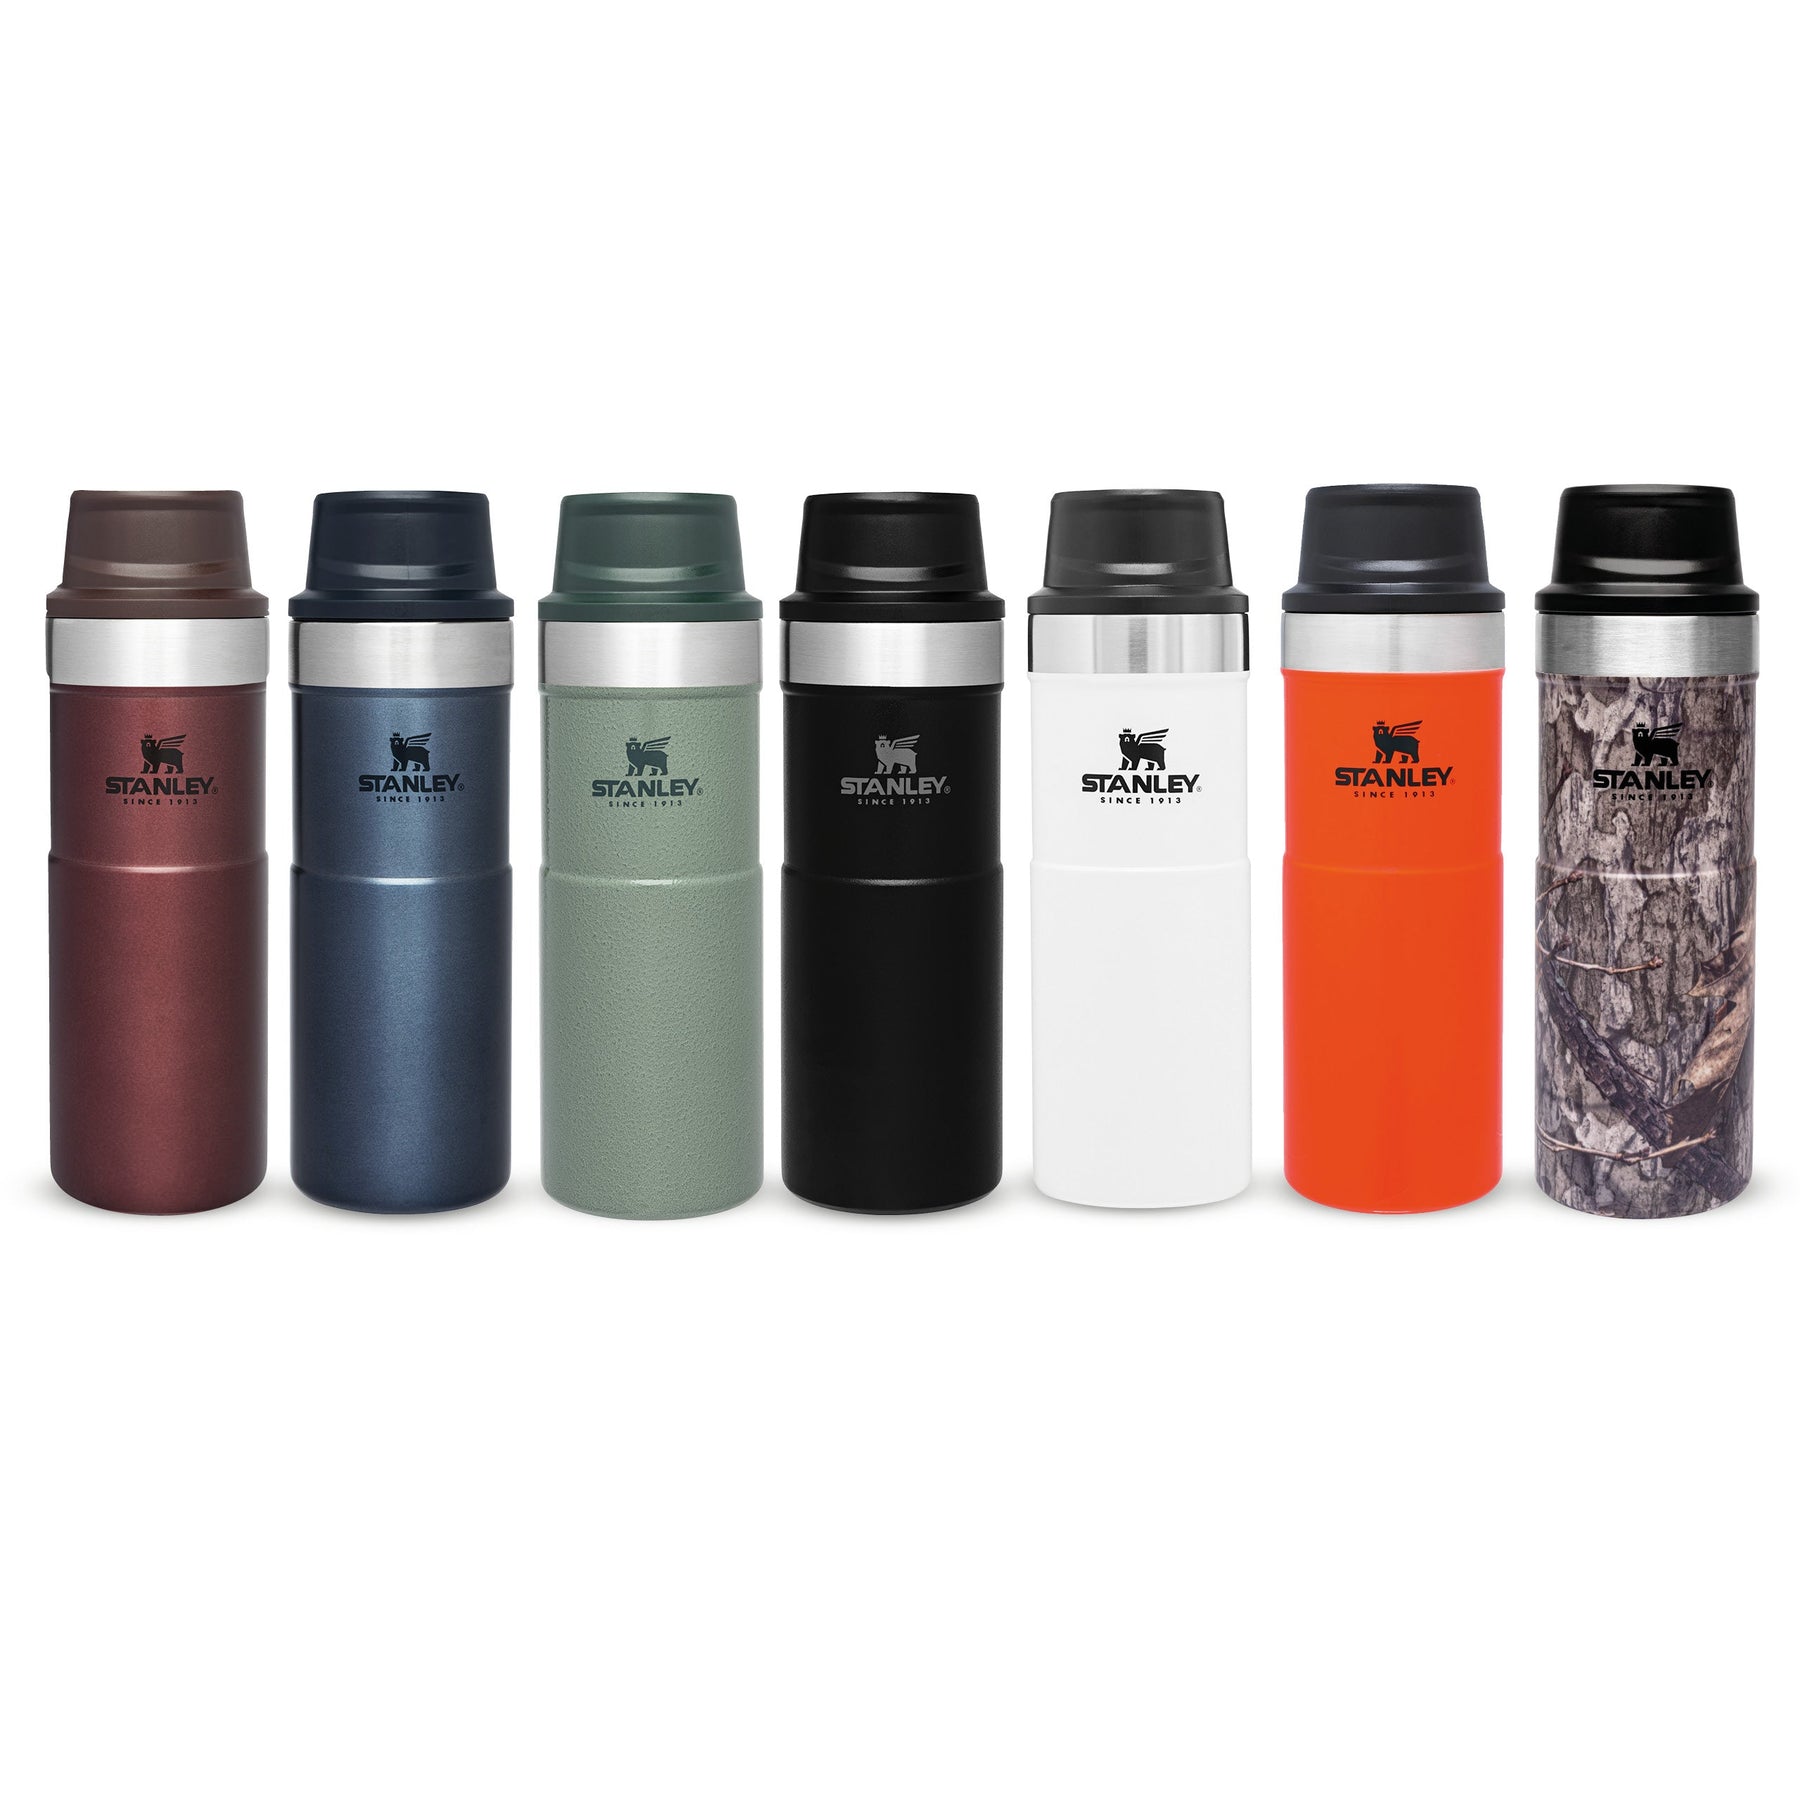 Trigger Classic Insulated mug 0,35 l - Stanley 10-09848-006